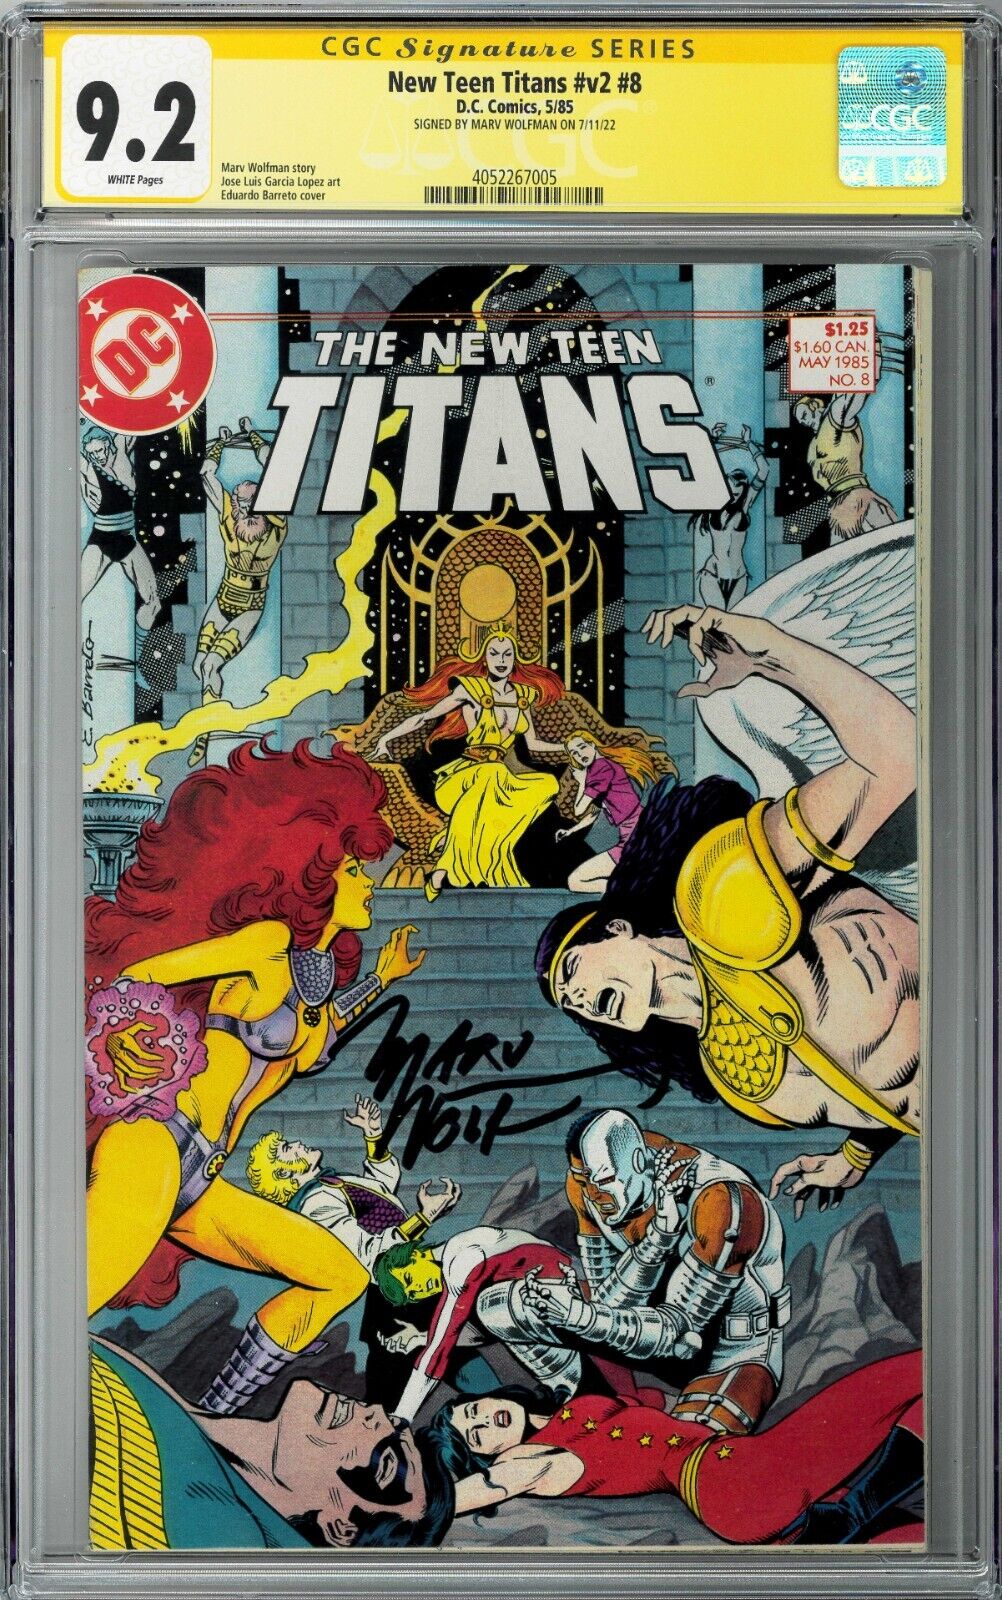 New Teen Titans v2 #8 CGC SS 9.2 (May 1985, DC) Signed by Marv Wolfman, Cyborg